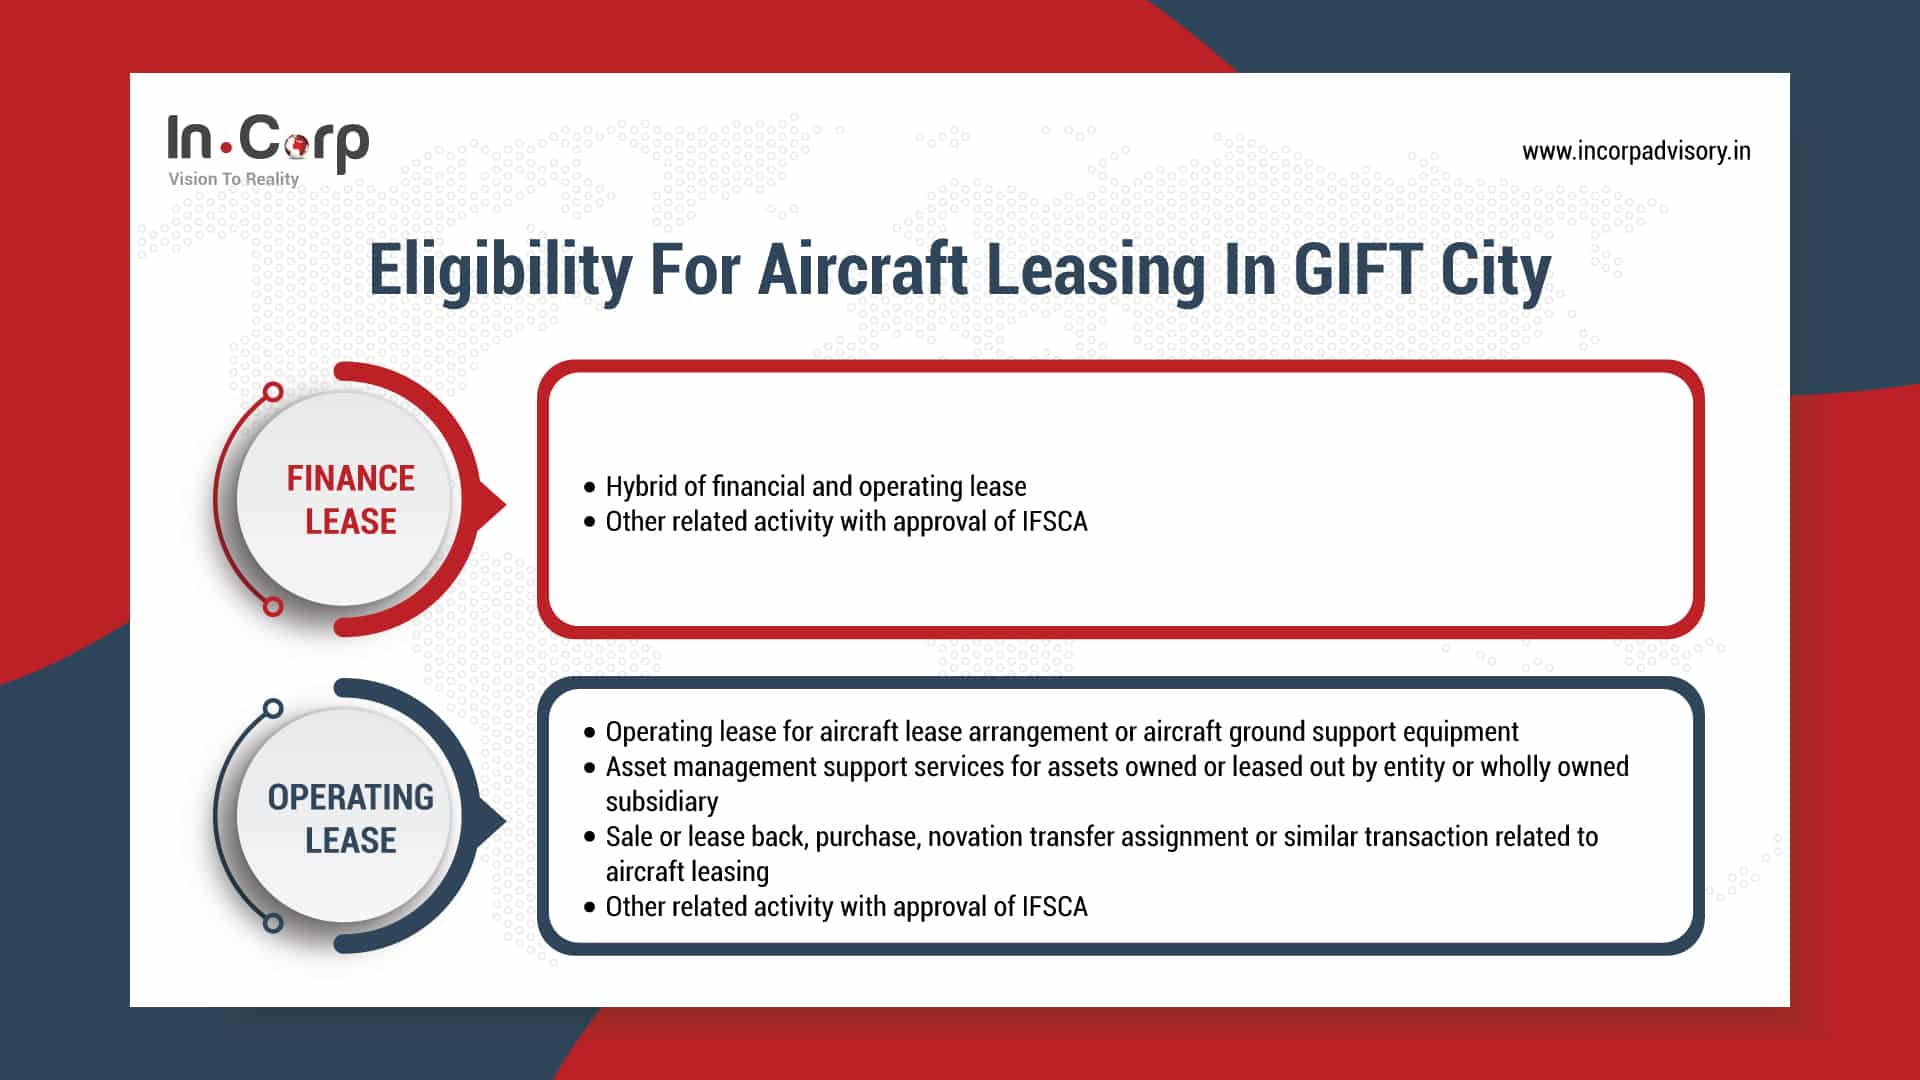 Eligibility for Aircraft Leasing in GIFT City